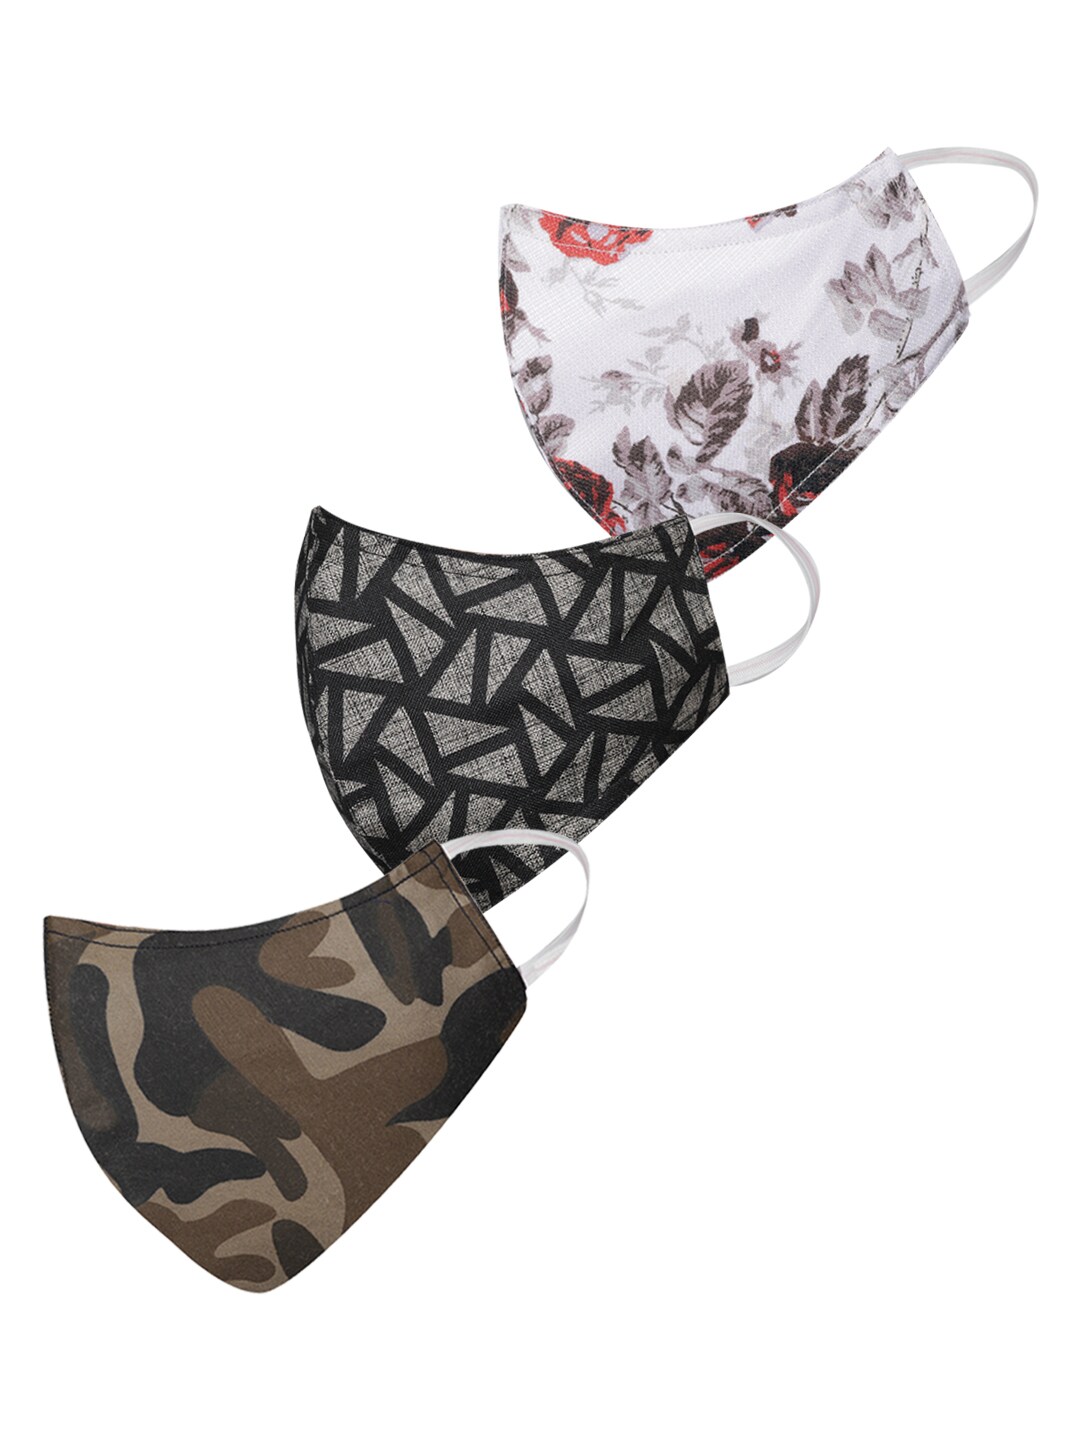 VASTRAMAY Unisex Set of 3 Printed 3-Ply Reusable Protective Outdoor Cloth Face Masks Price in India